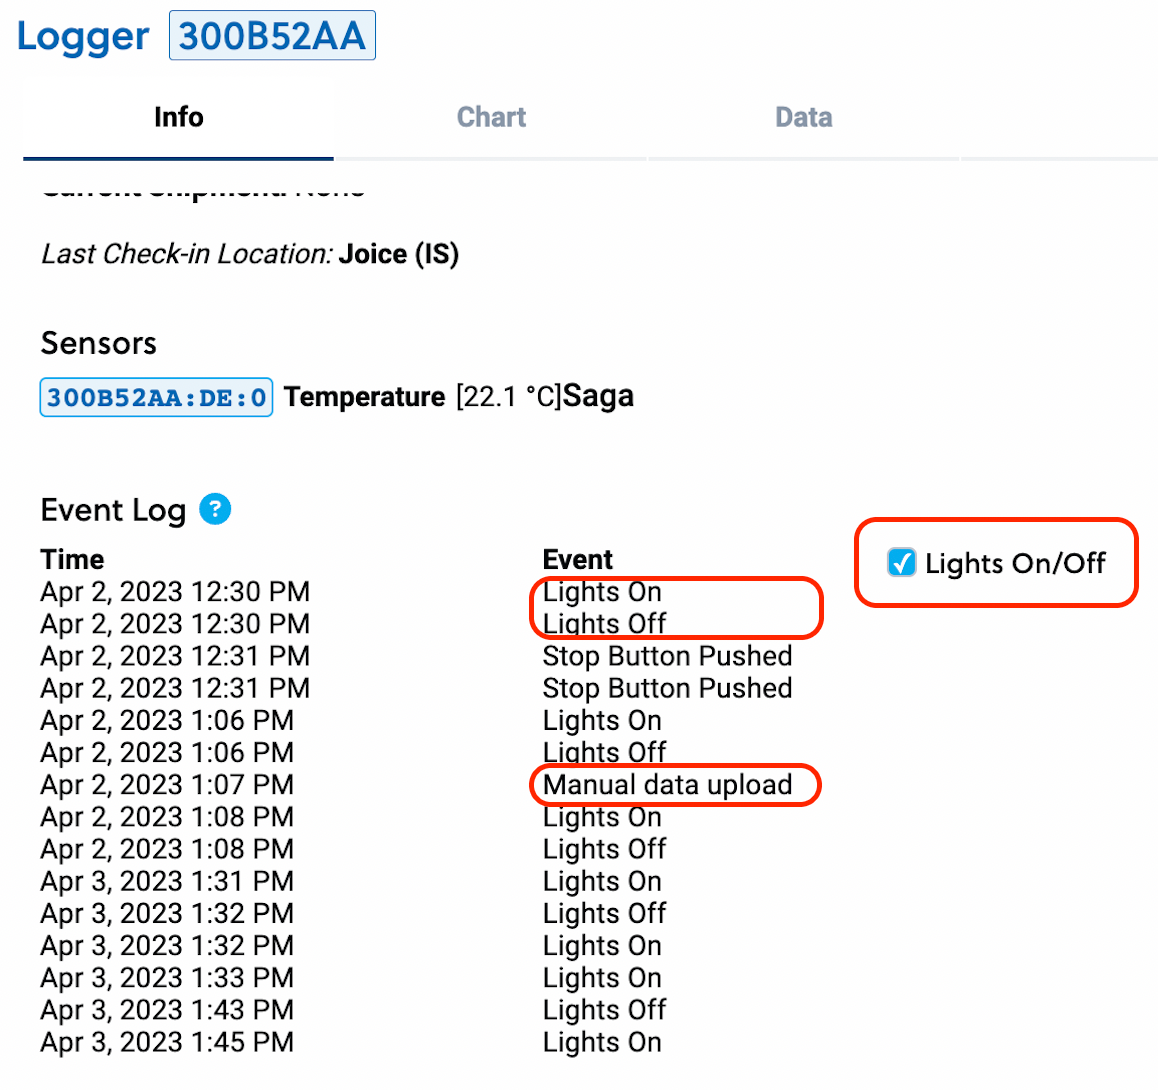 Screenshot showing light events and manual data upload events in the logger events list